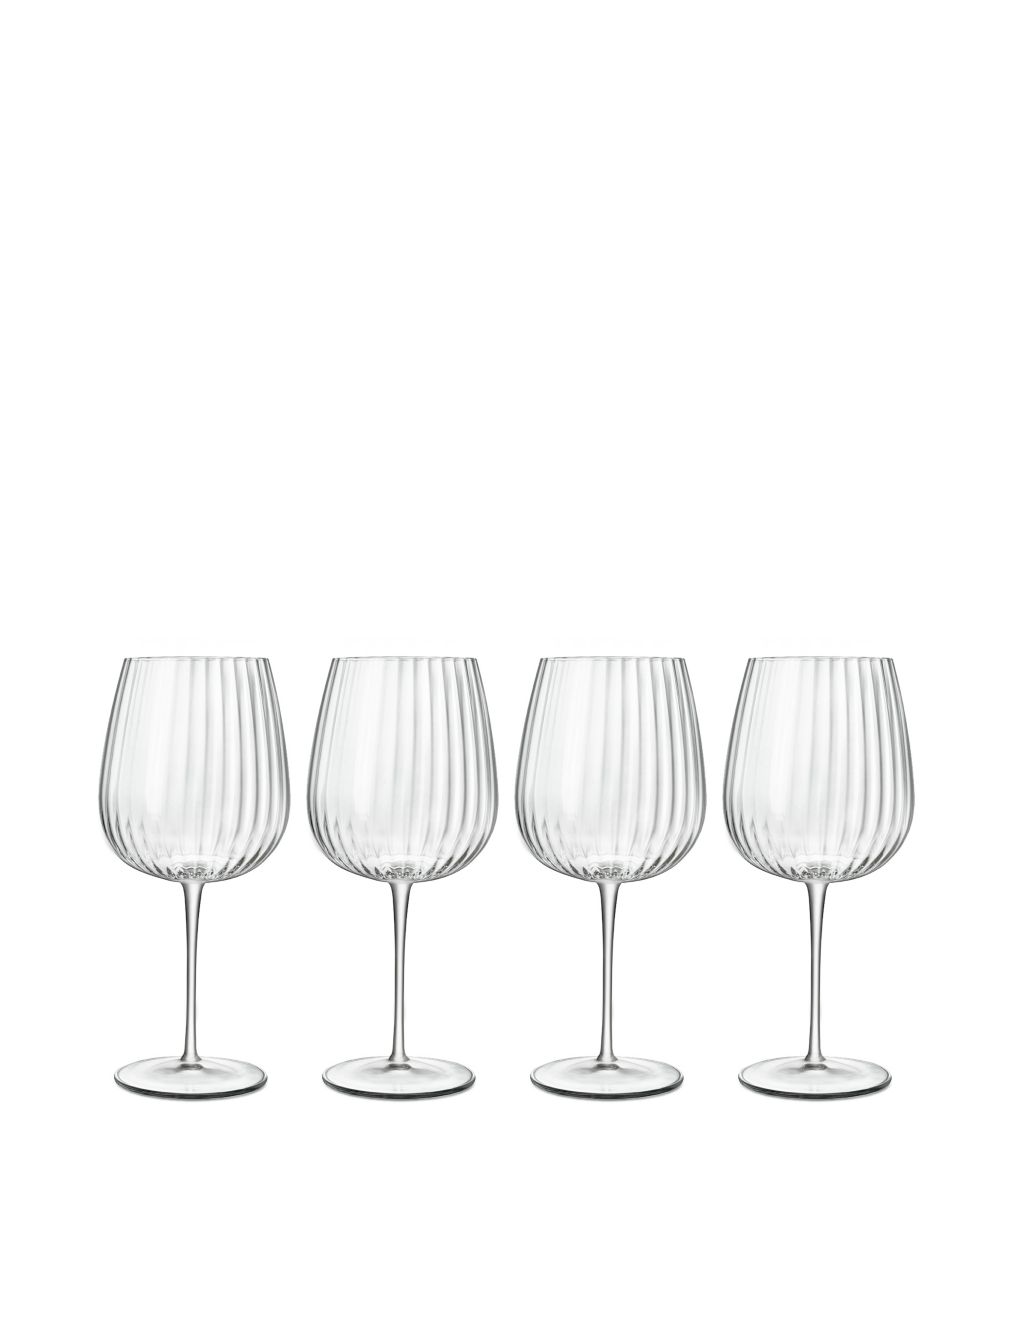 Set of 4 Optica Textured Gin Glasses image 1